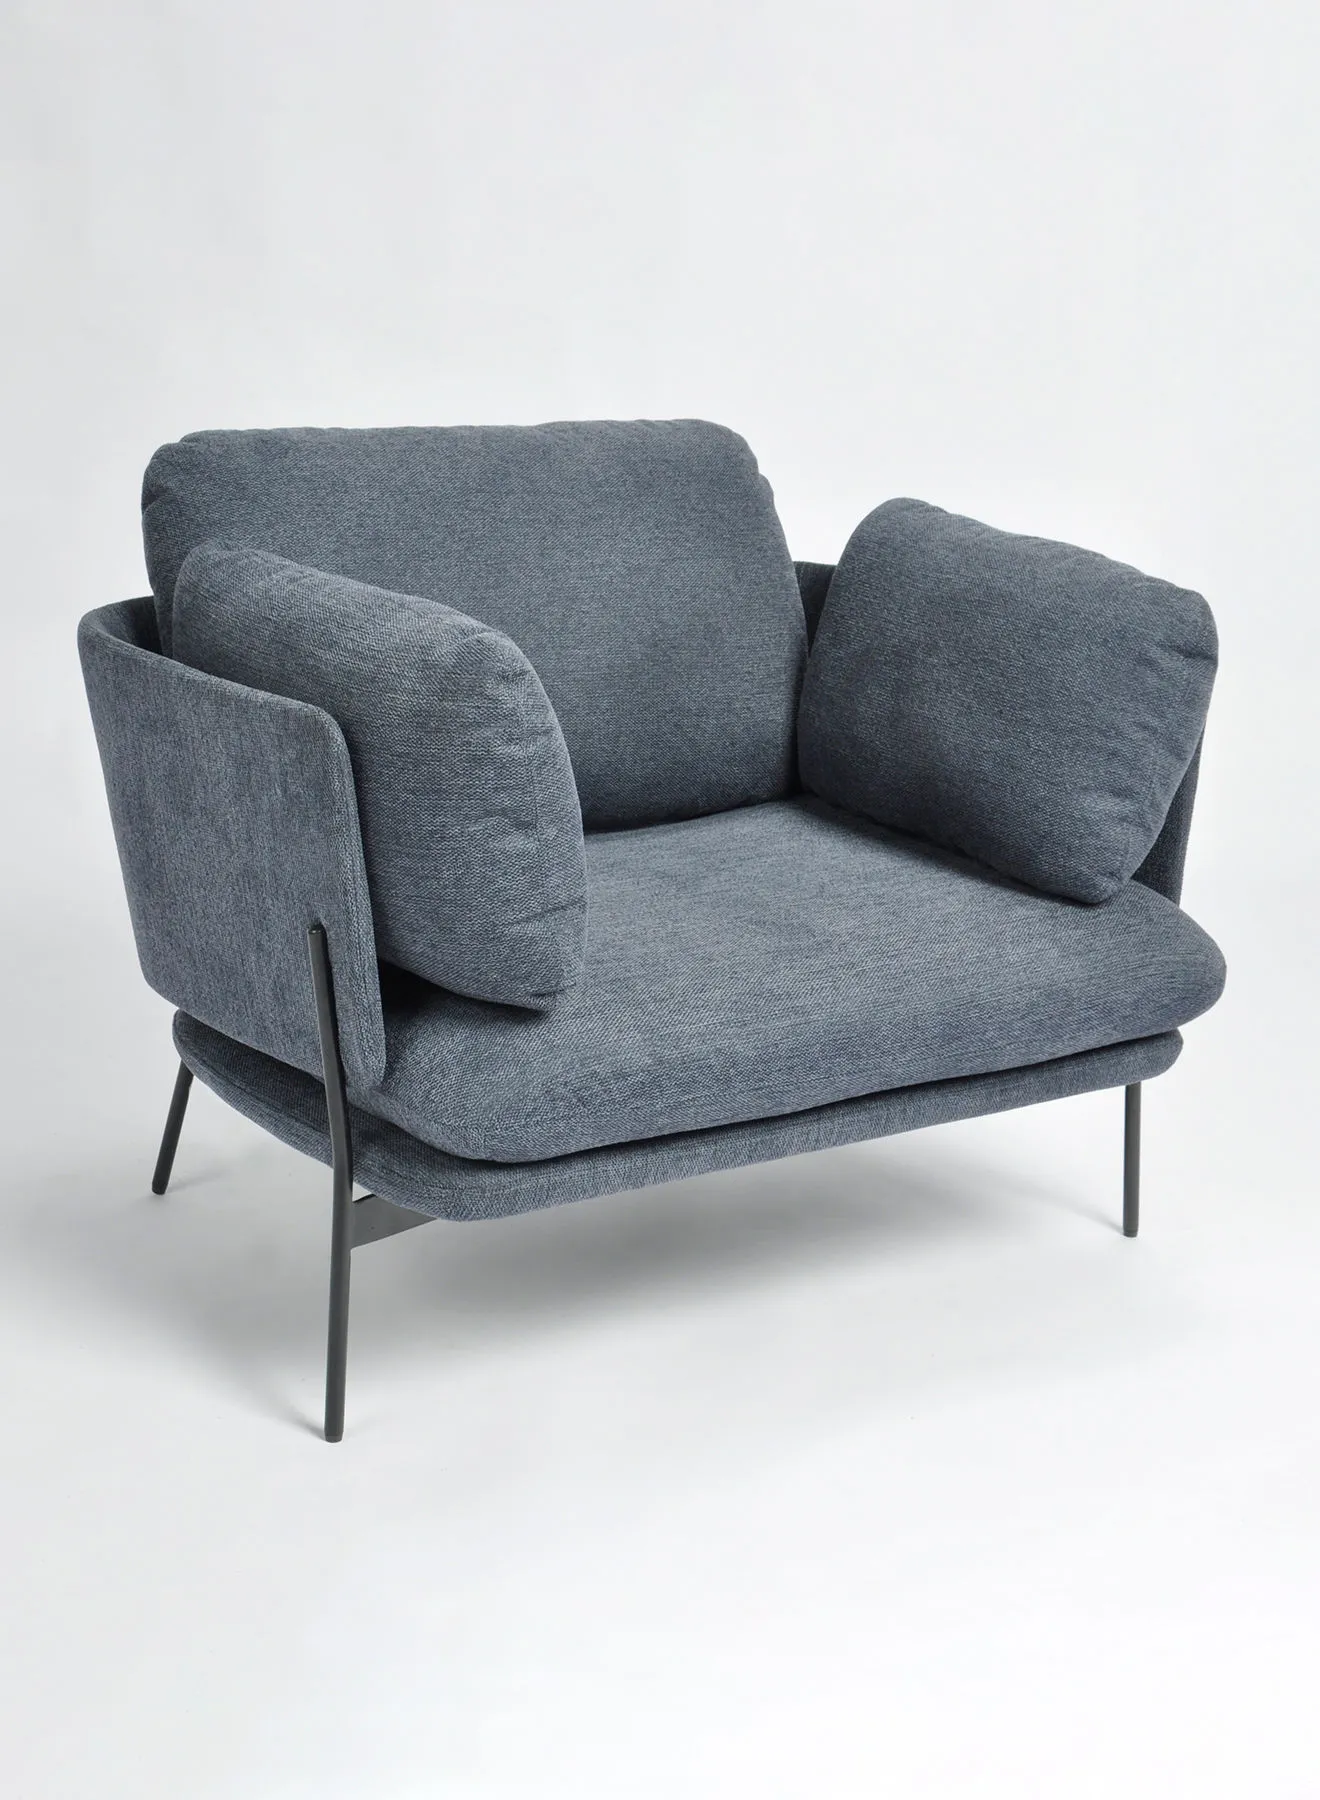 Switch Armchair - Upholstered Fabric Blue Couch - 95 X 78 X 78 - Relaxing Sofa